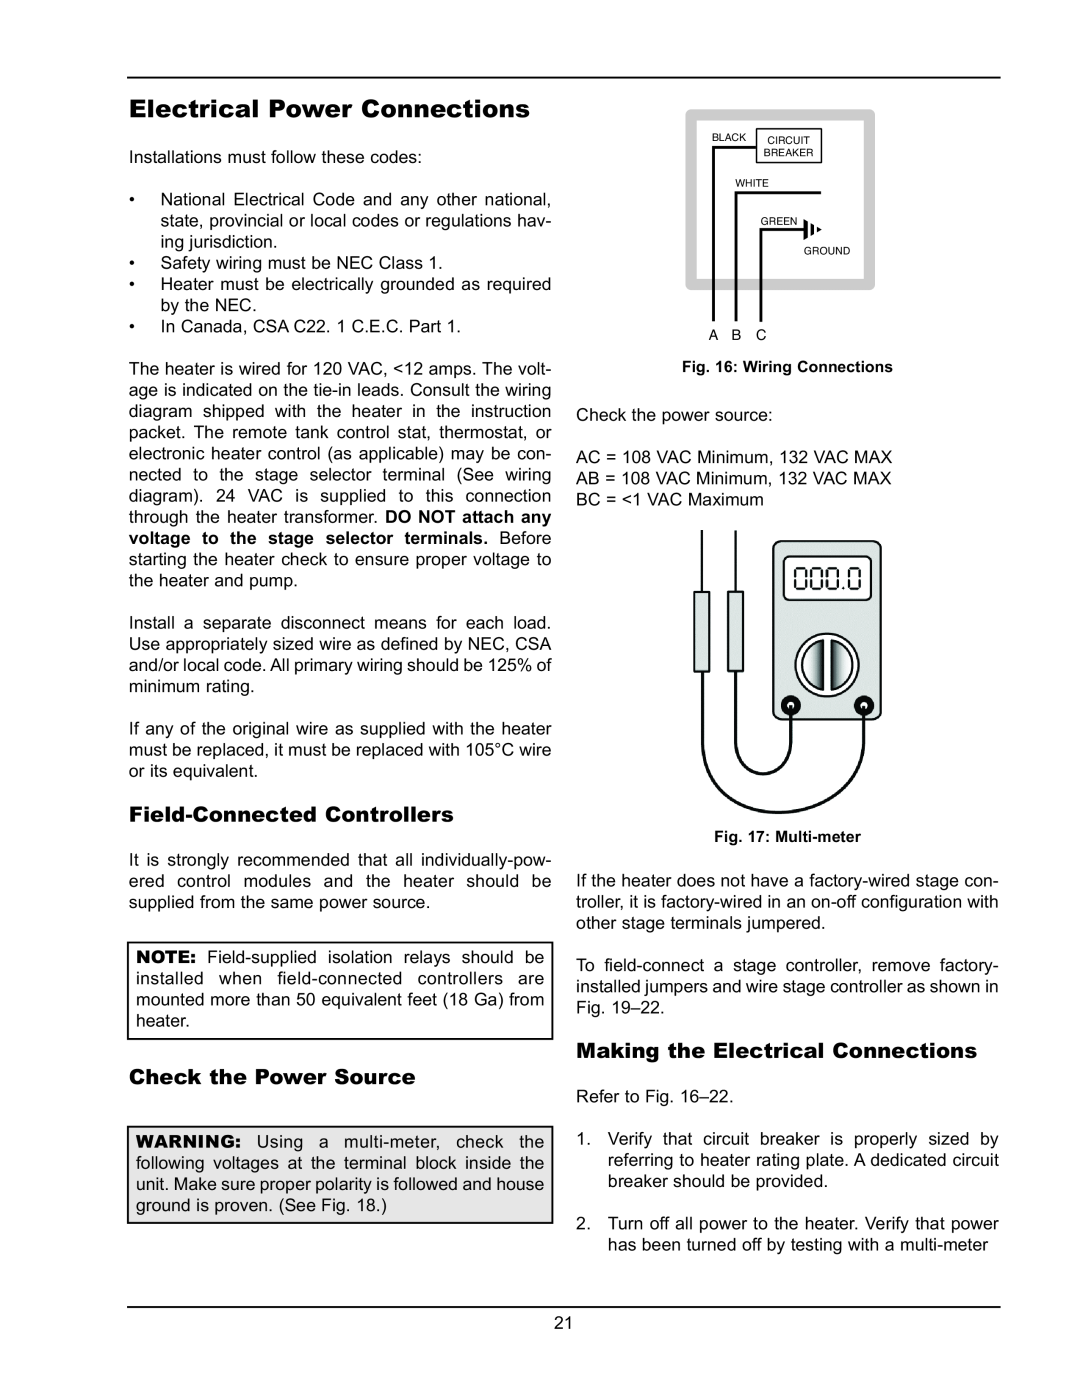 Raypak 399B-2339B operating instructions Electrical Power Connections, Field-ConnectedControllers, Check the Power Source 